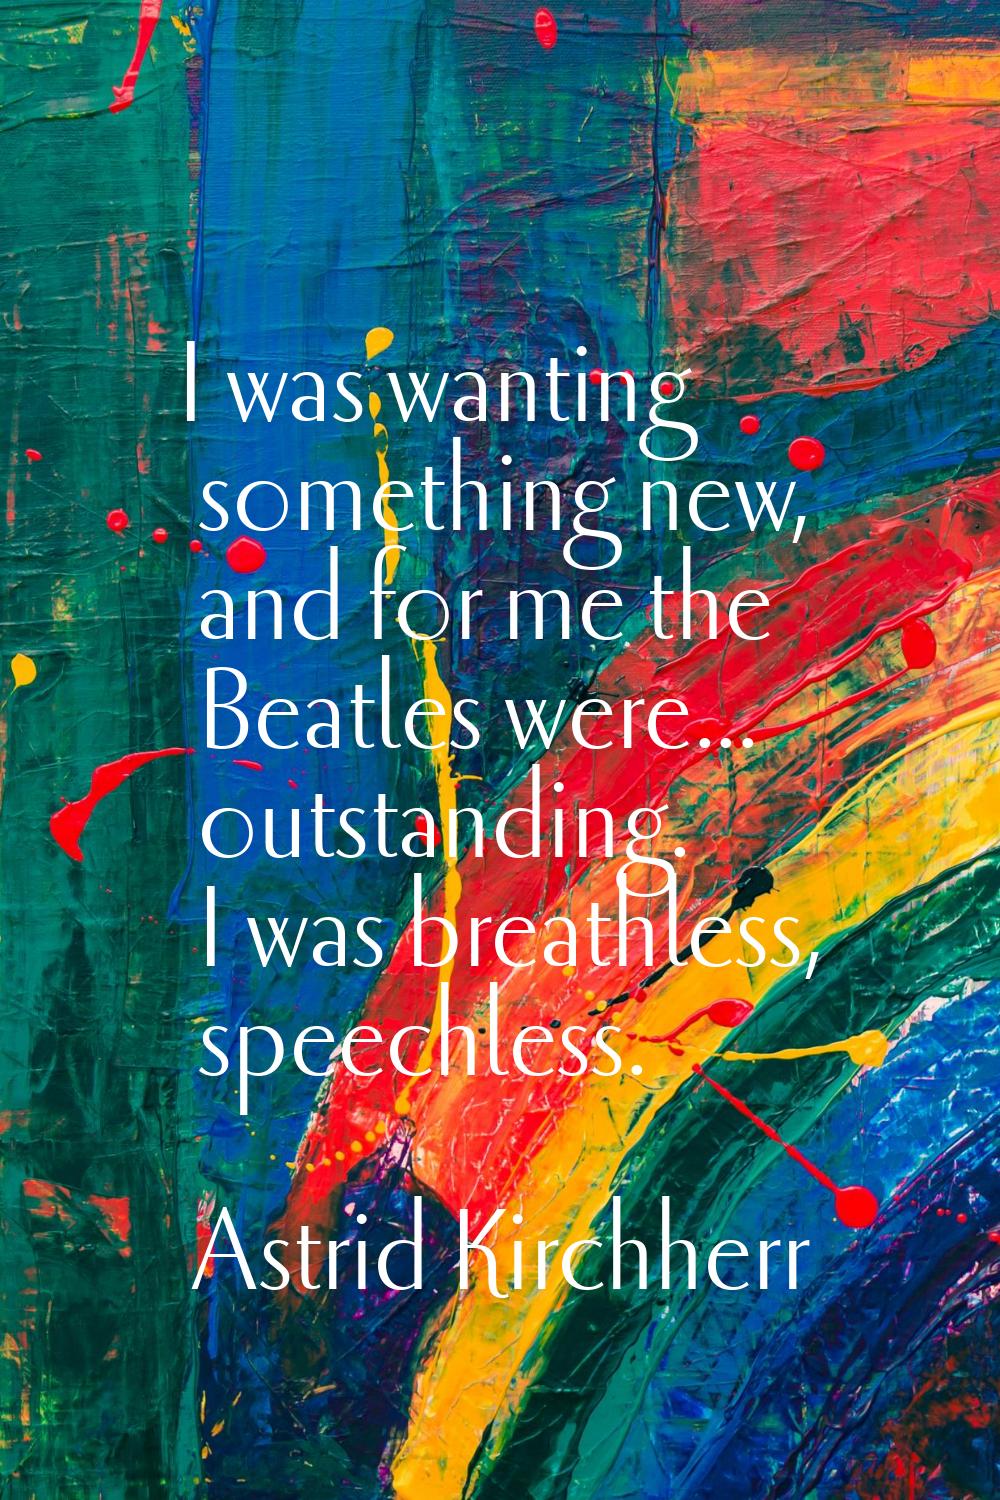 I was wanting something new, and for me the Beatles were... outstanding. I was breathless, speechle